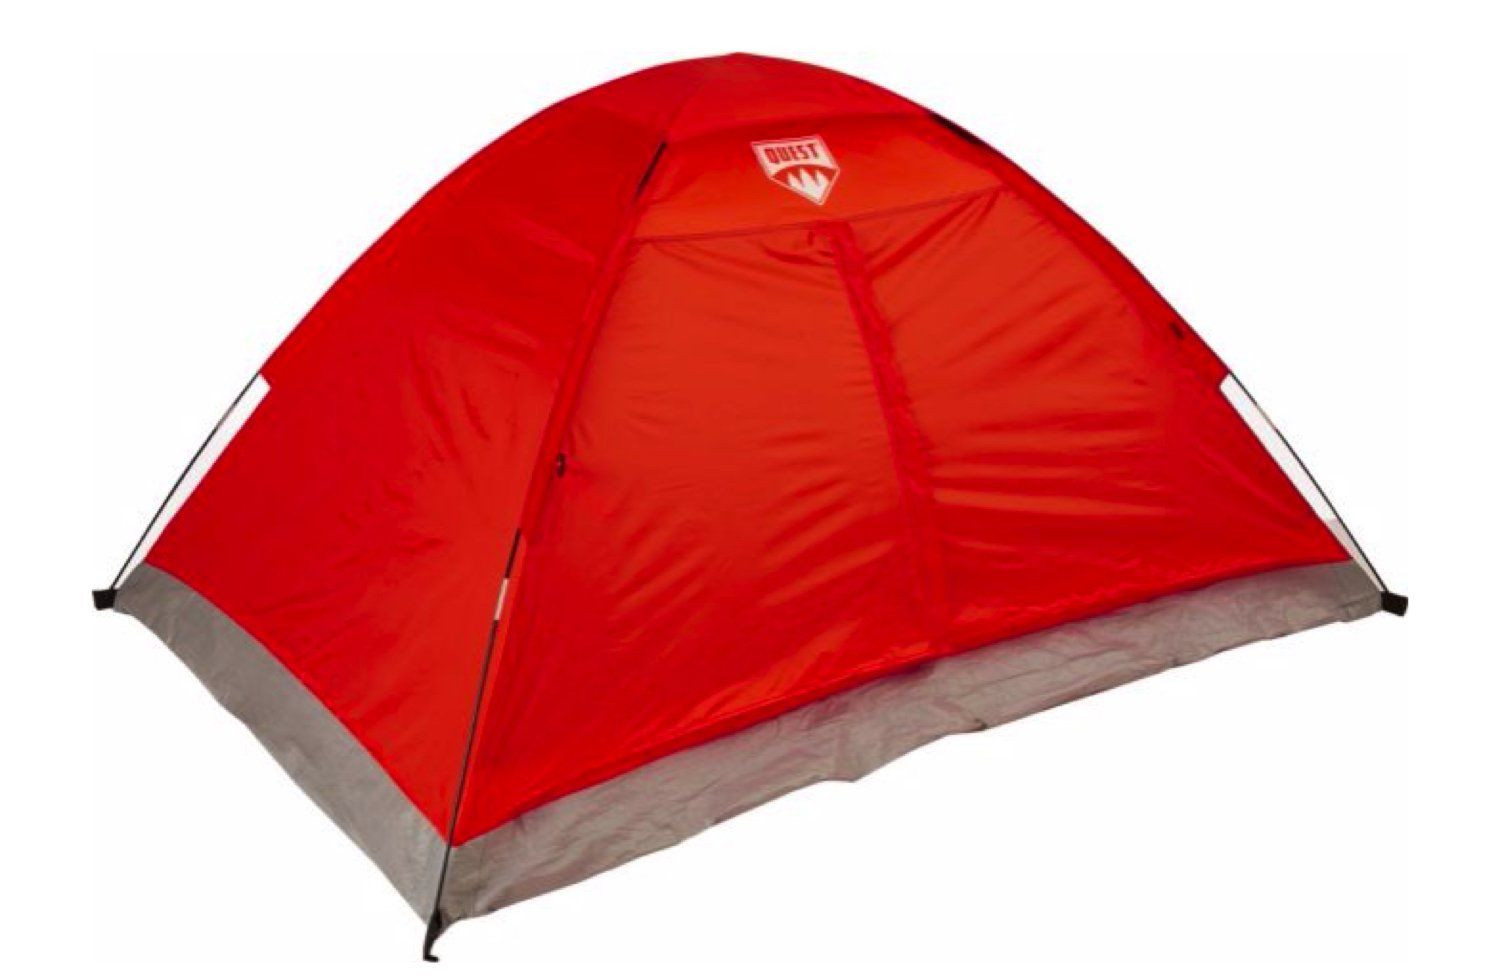 Quest Backyard Tent
 Quest 2 Person Tent Camping Backyard Red You can